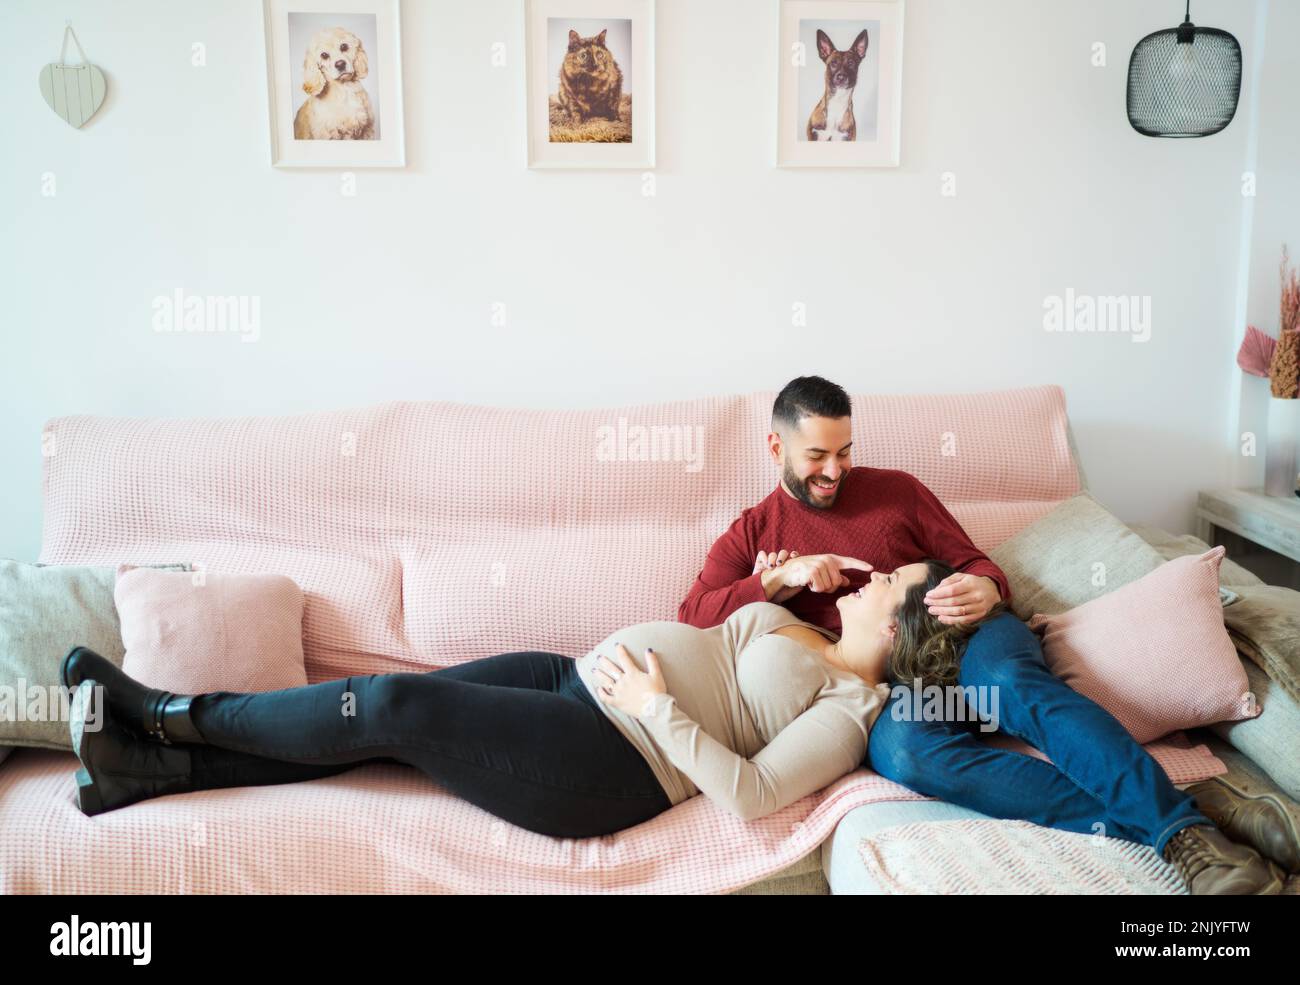 https://c8.alamy.com/comp/2NJYFTW/loving-man-in-casual-clothes-sitting-with-pregnant-woman-lying-down-looking-at-each-other-on-comfortable-sofa-at-home-2NJYFTW.jpg